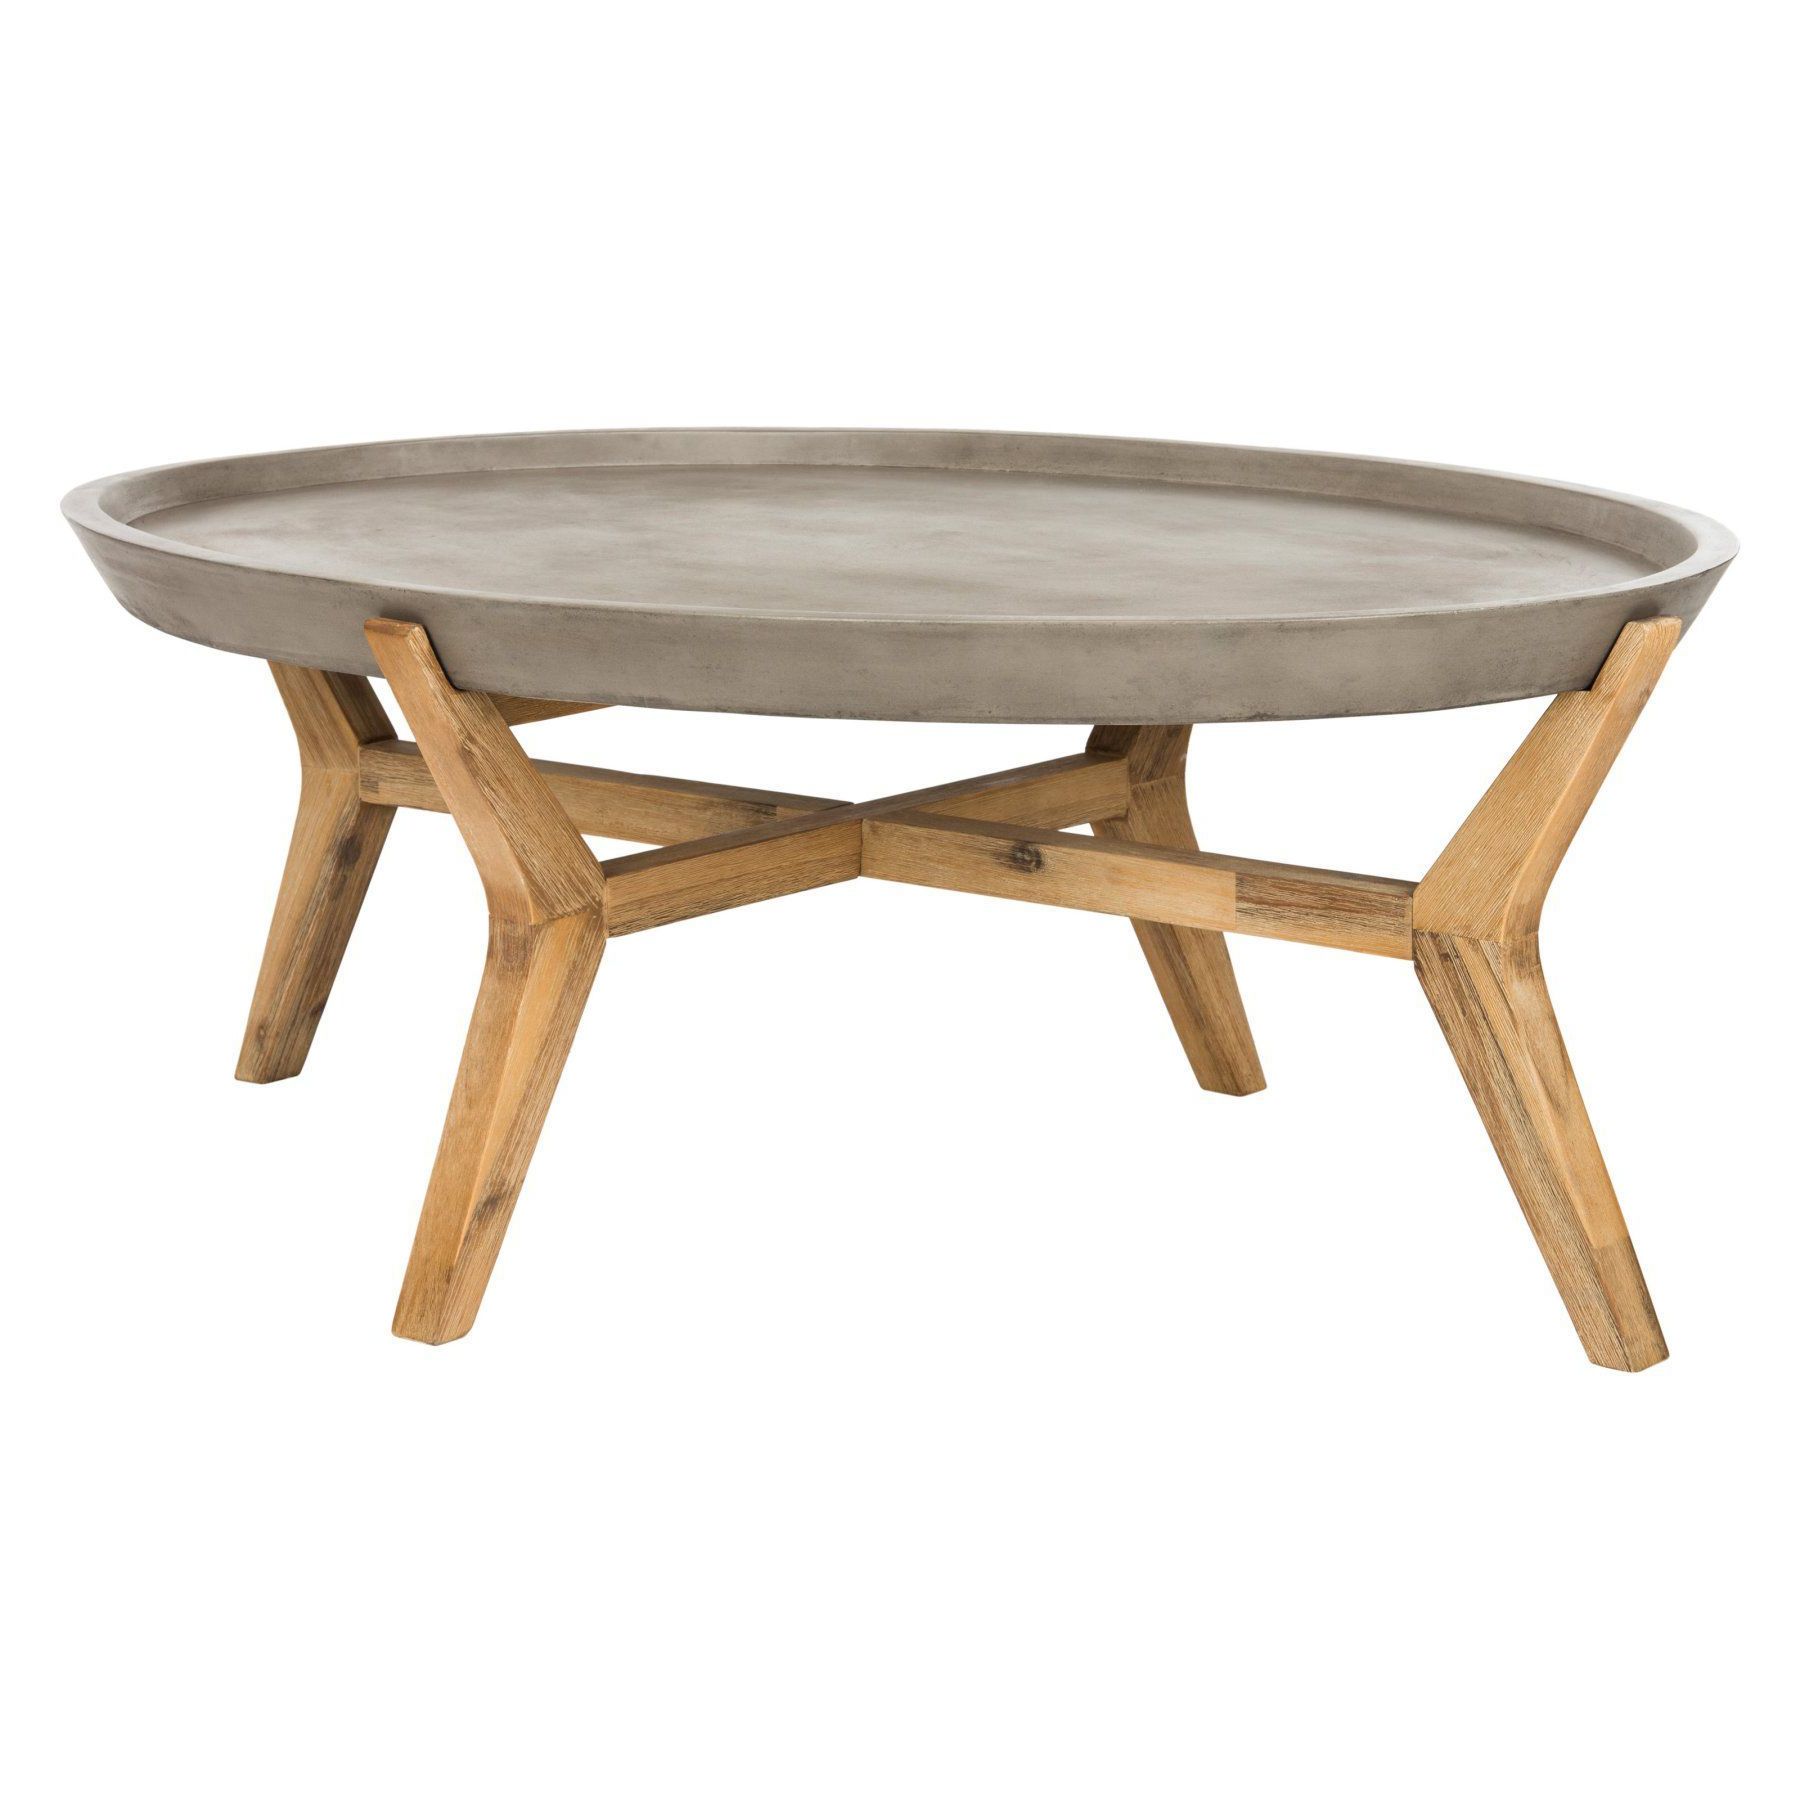 Safavieh Hadwin Modern Concrete Oval Coffee Table (with Intended For Current Modern Concrete Coffee Tables (View 13 of 20)